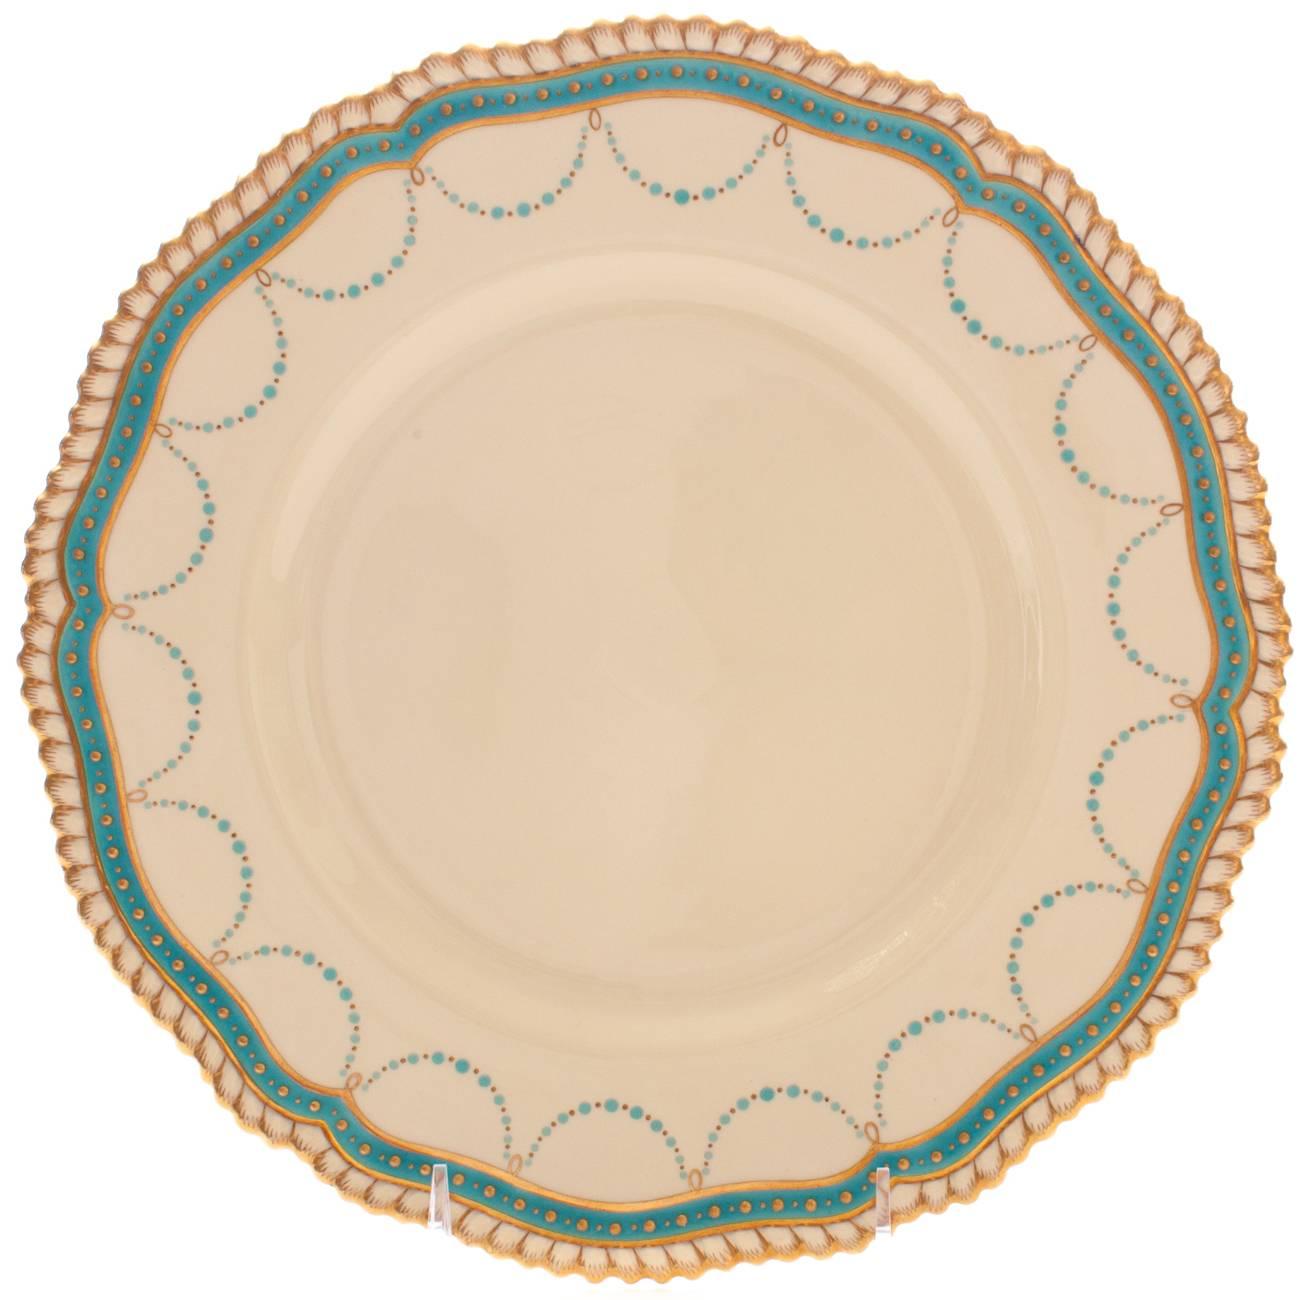 12 Turquoise Jeweled Antique English with Gold Beading Dinner Plates